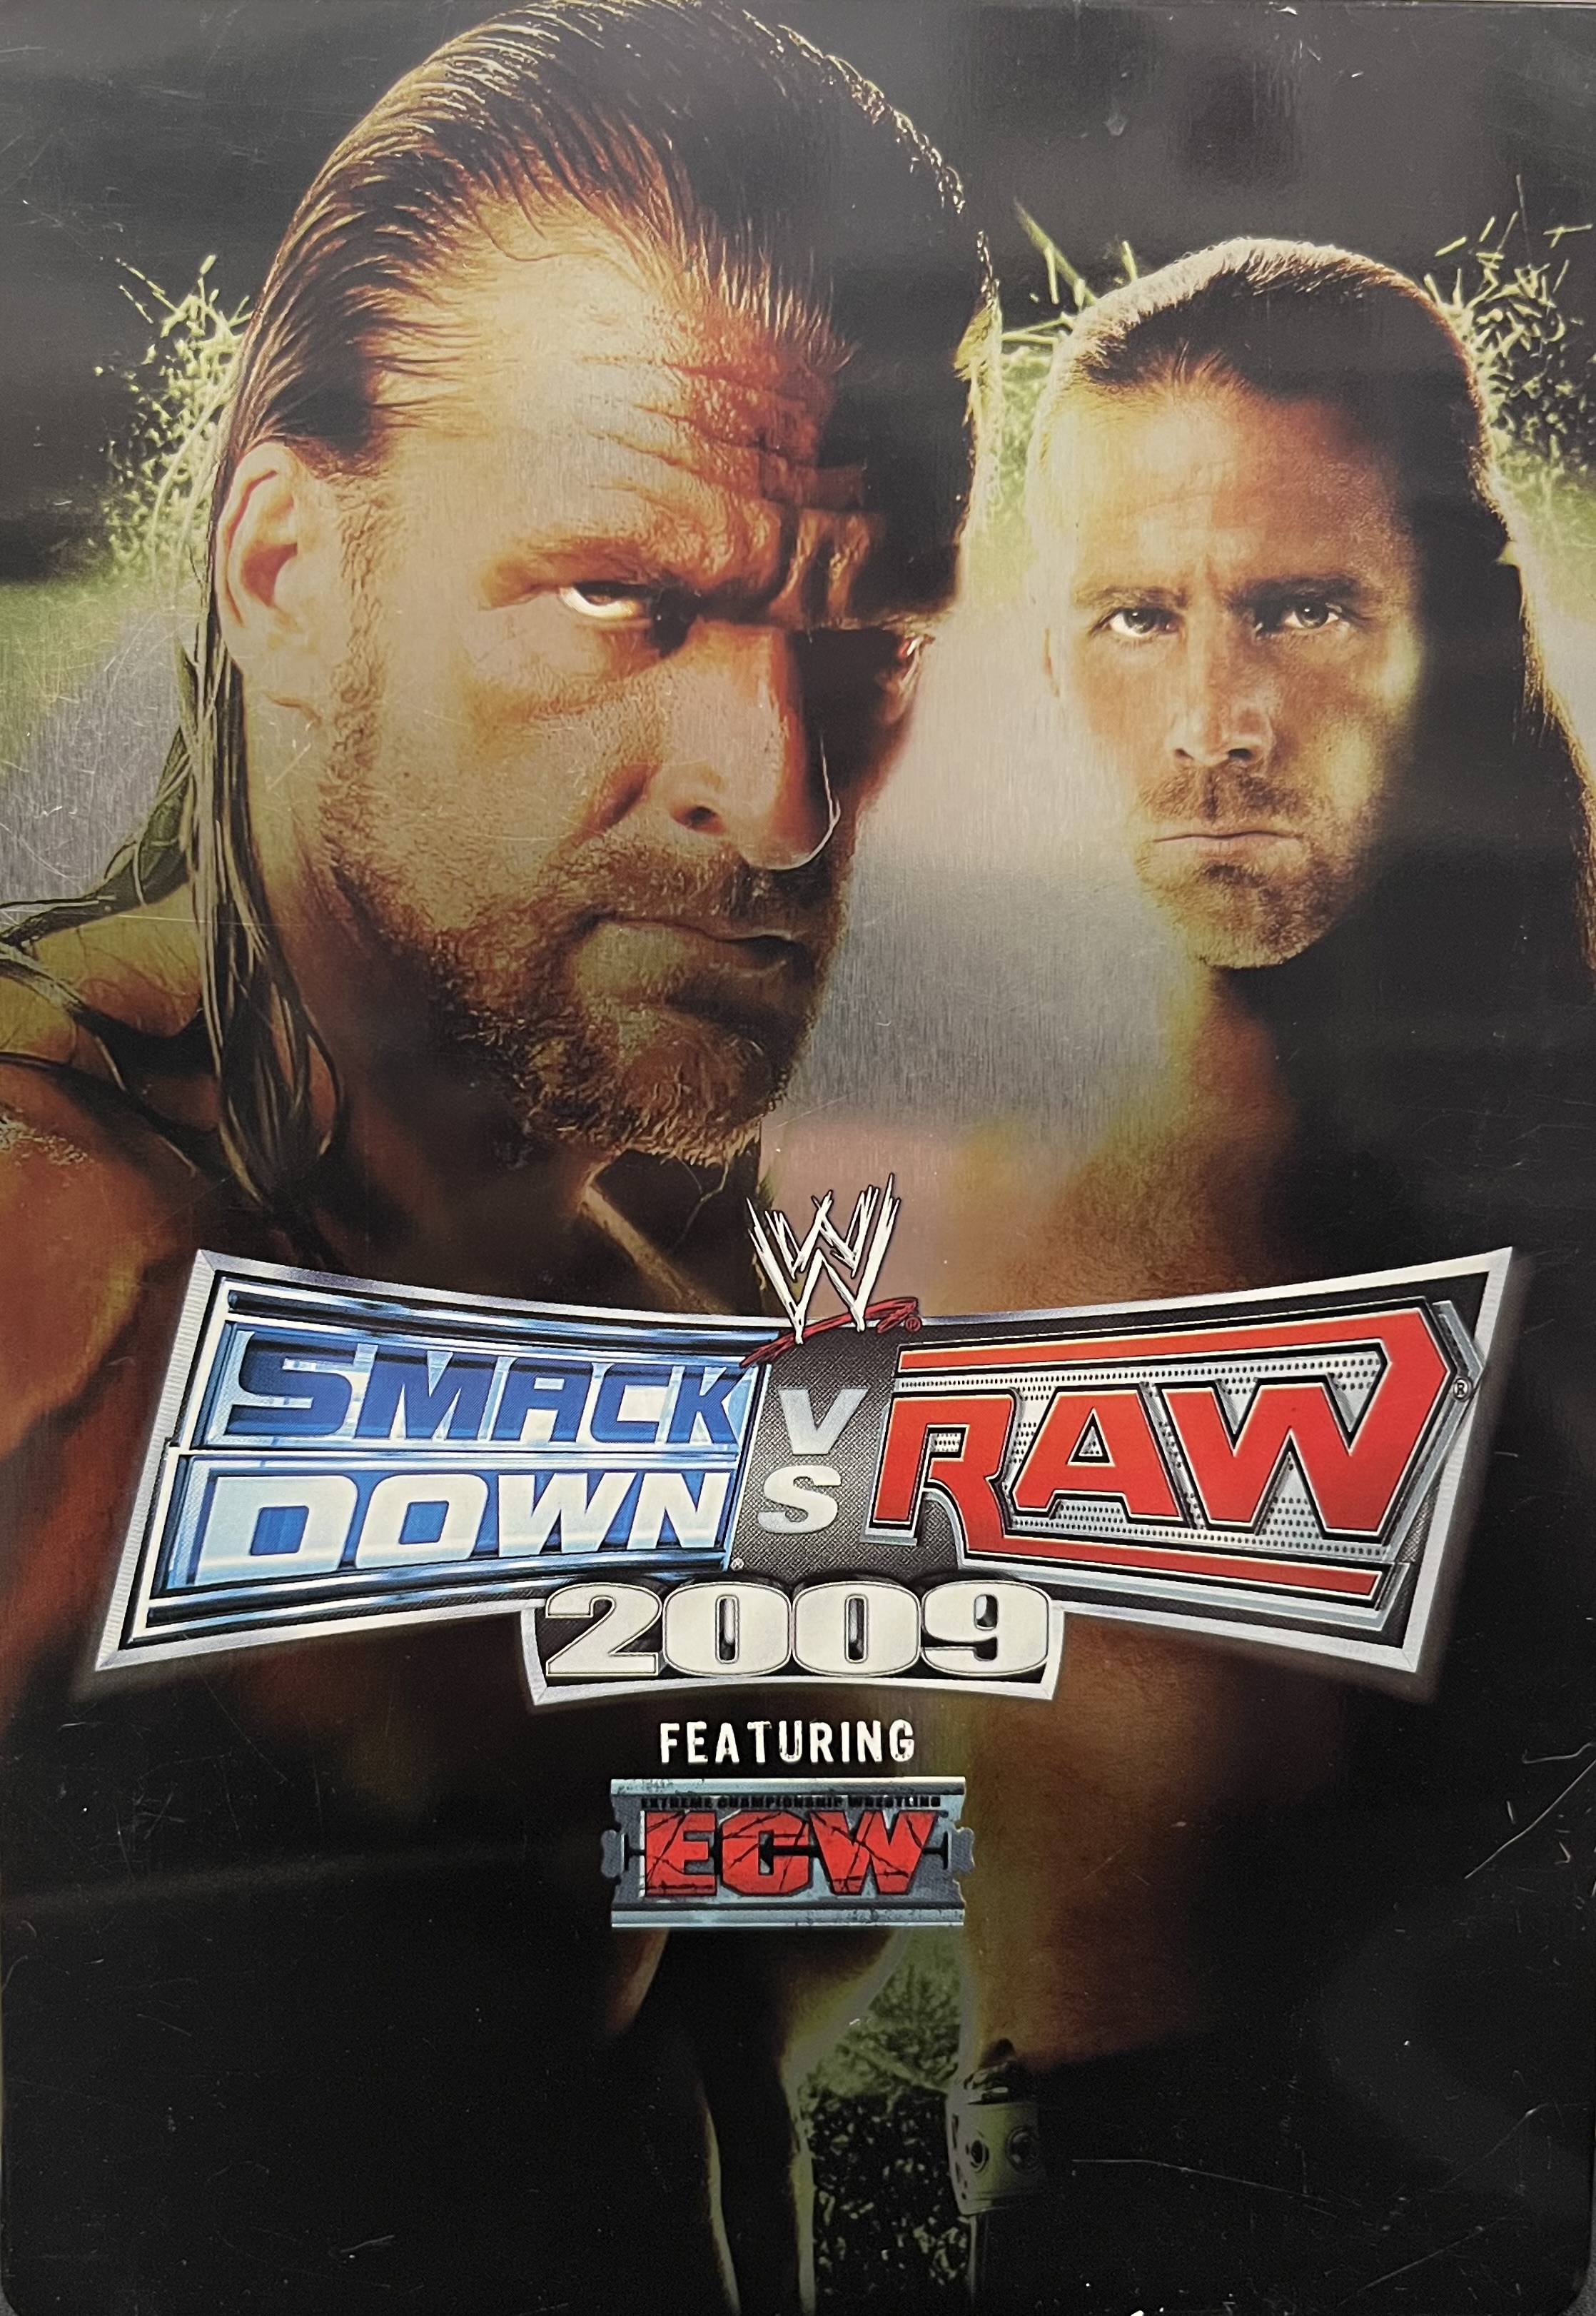 WWE Smackdown vs Raw 2009 Featuring ECW